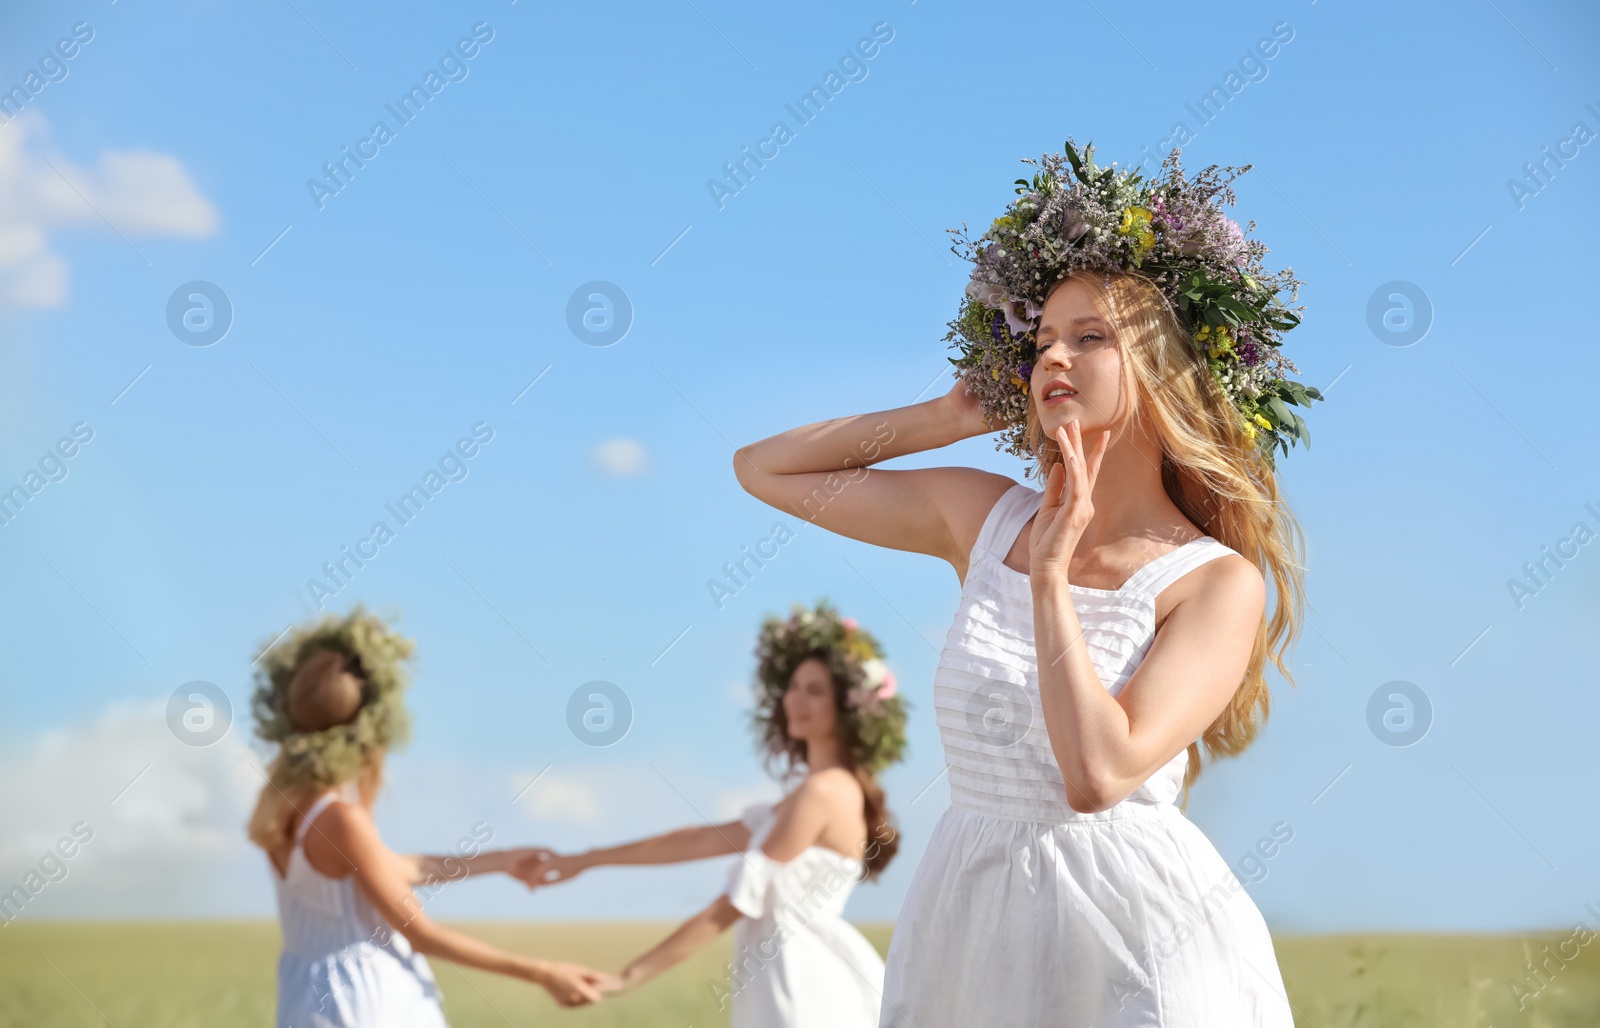 Photo of Young women wearing wreaths made of beautiful flowers in field on sunny day